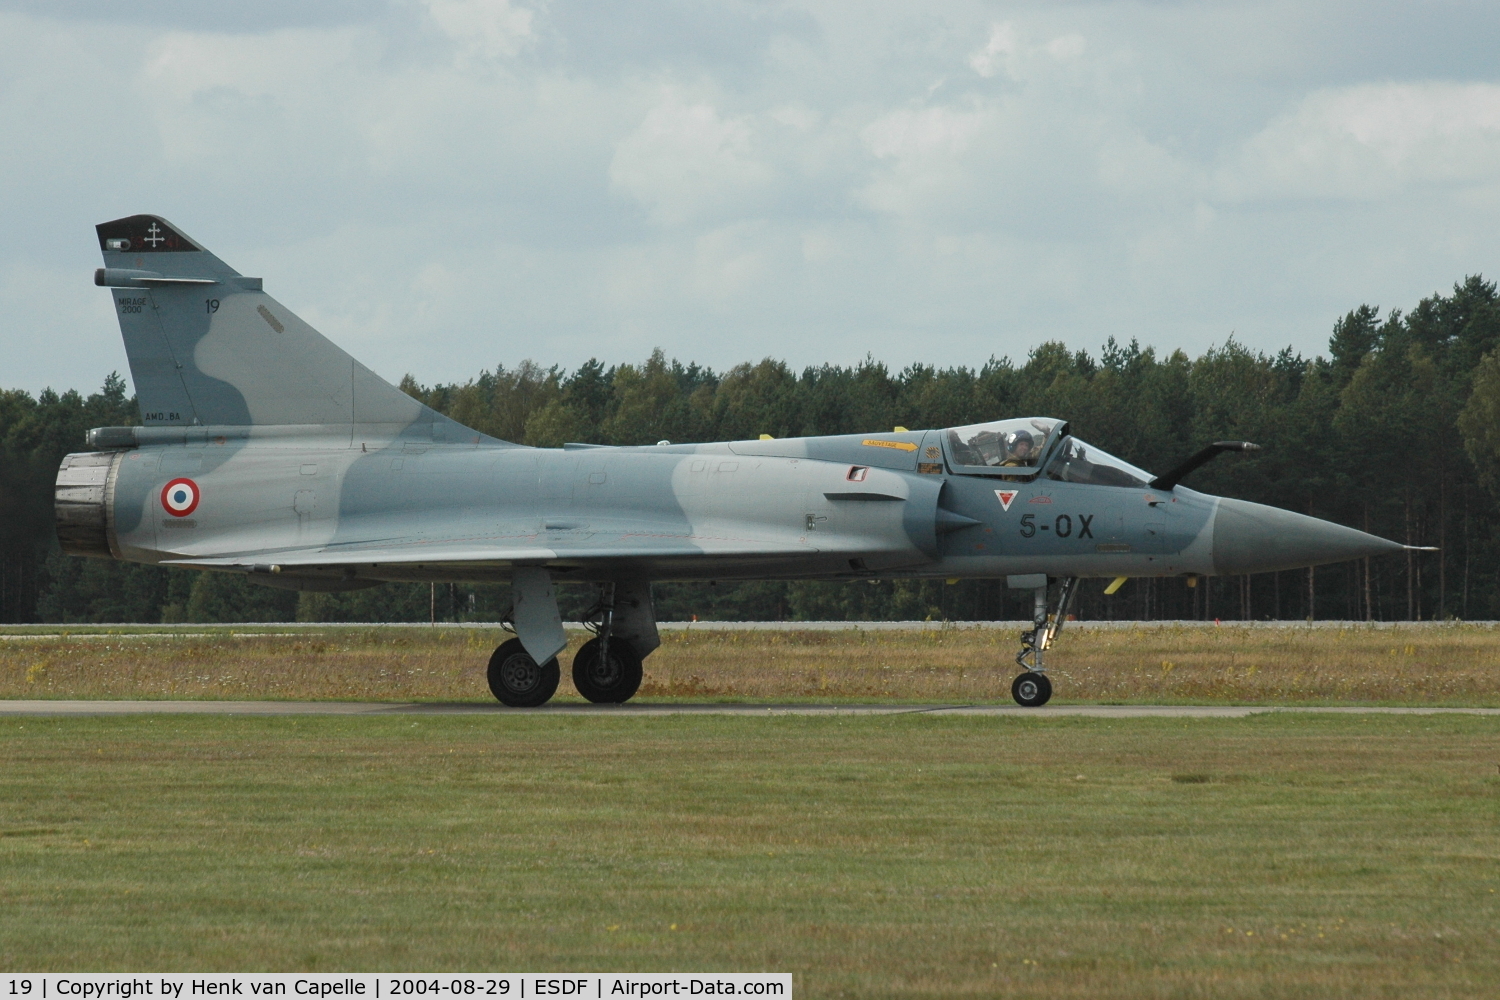 19, Dassault Mirage 2000C C/N 50, Bonjour! Dassault Mirage 2000C of EC02.005 of the Frencg Air Force, here with code 5-OX, taxying in after a display at Ronneby Air Base, Sweden